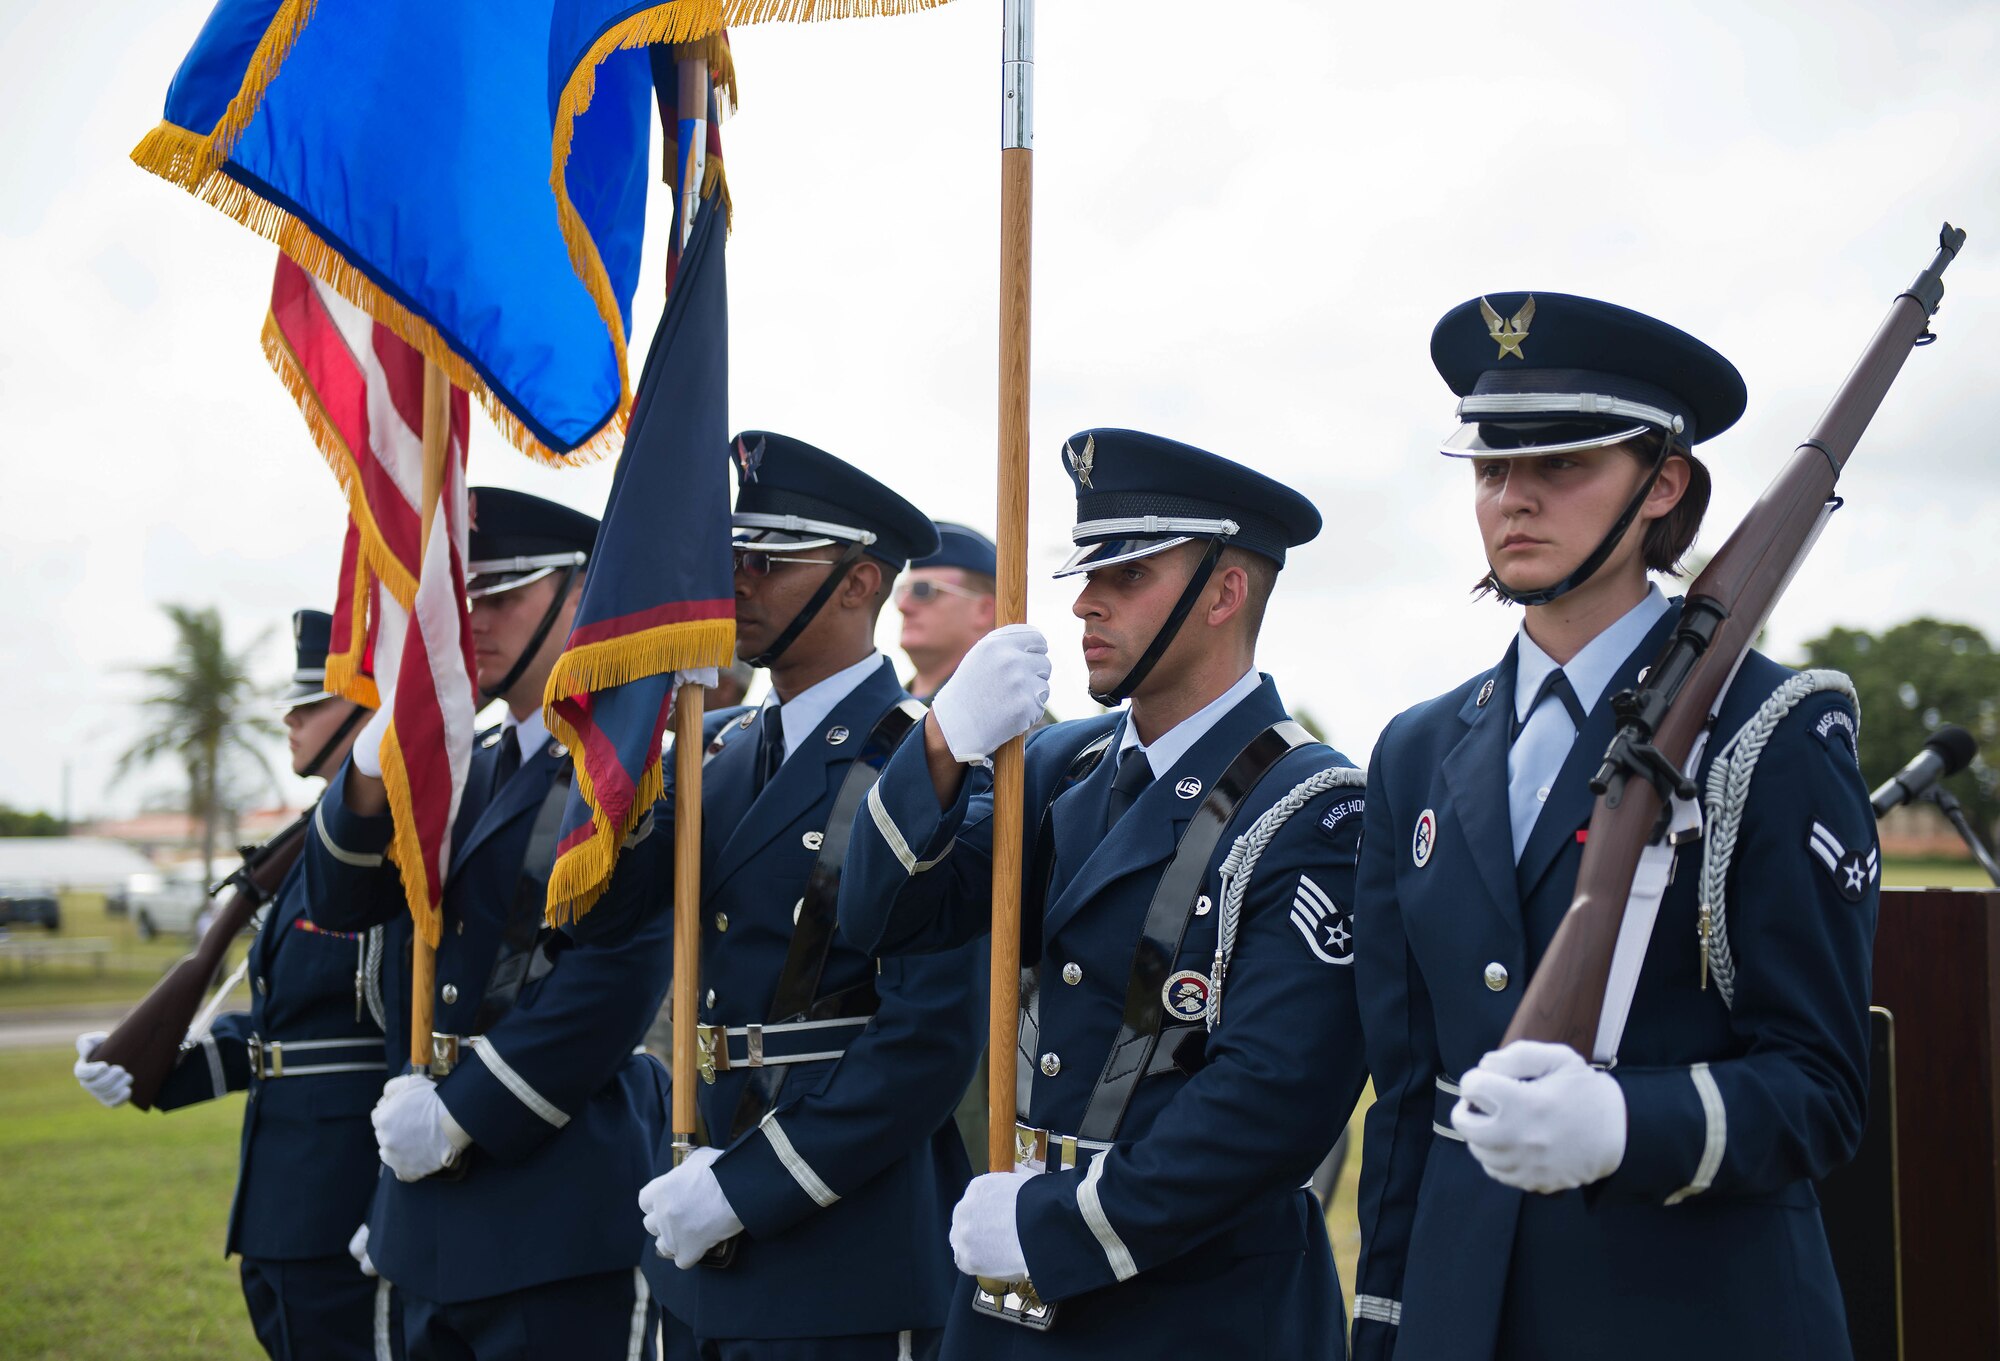 The Andersen Blue Knights Honor Guard team presents the colors during the F-4E Phantom II Rededication Ceremony, April 21, 2017, at Andersen Air Force Base, Guam. The Phantom II was first deployed to the Pacific Air Forces in December 1964, in support of the Vietnam War. (U.S. Air Force photo by Airman 1st Class Christopher Quail/Released)